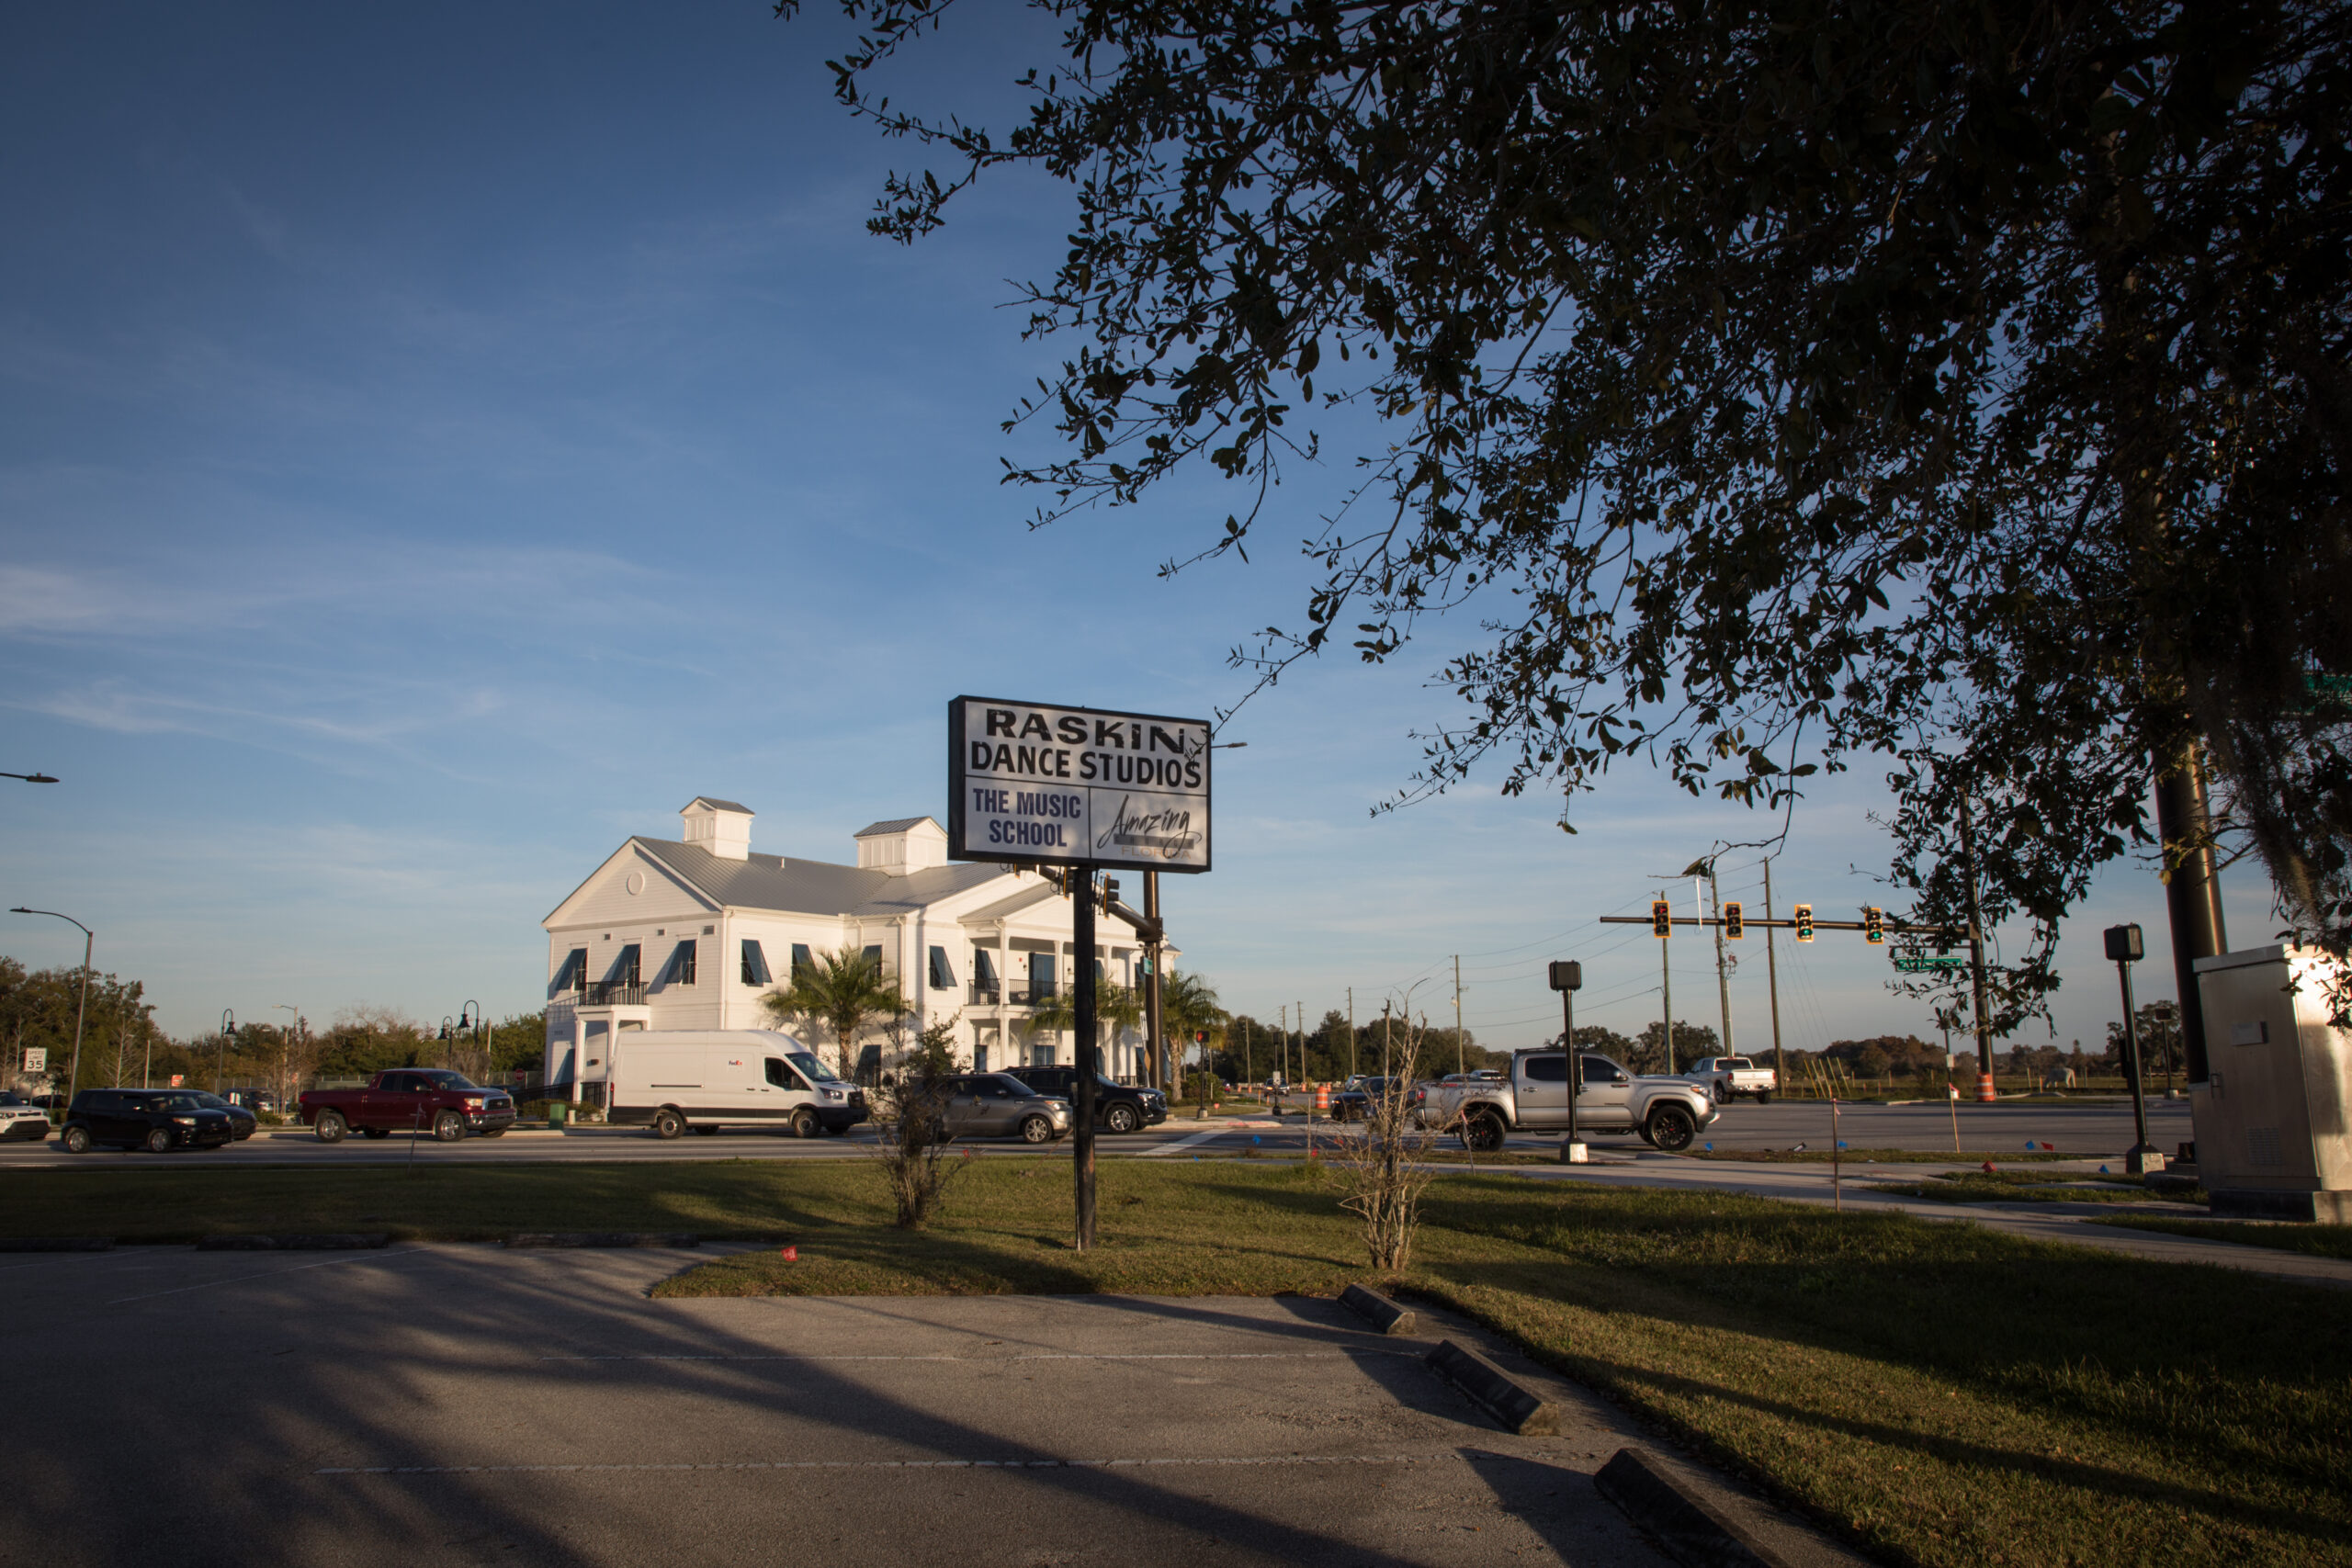 The Raskin Dance Studio sign stands tall on the corner of the busy intersection of Partin Settlement Road and Cross Prairie Parkway in Kissimmee, Fla.